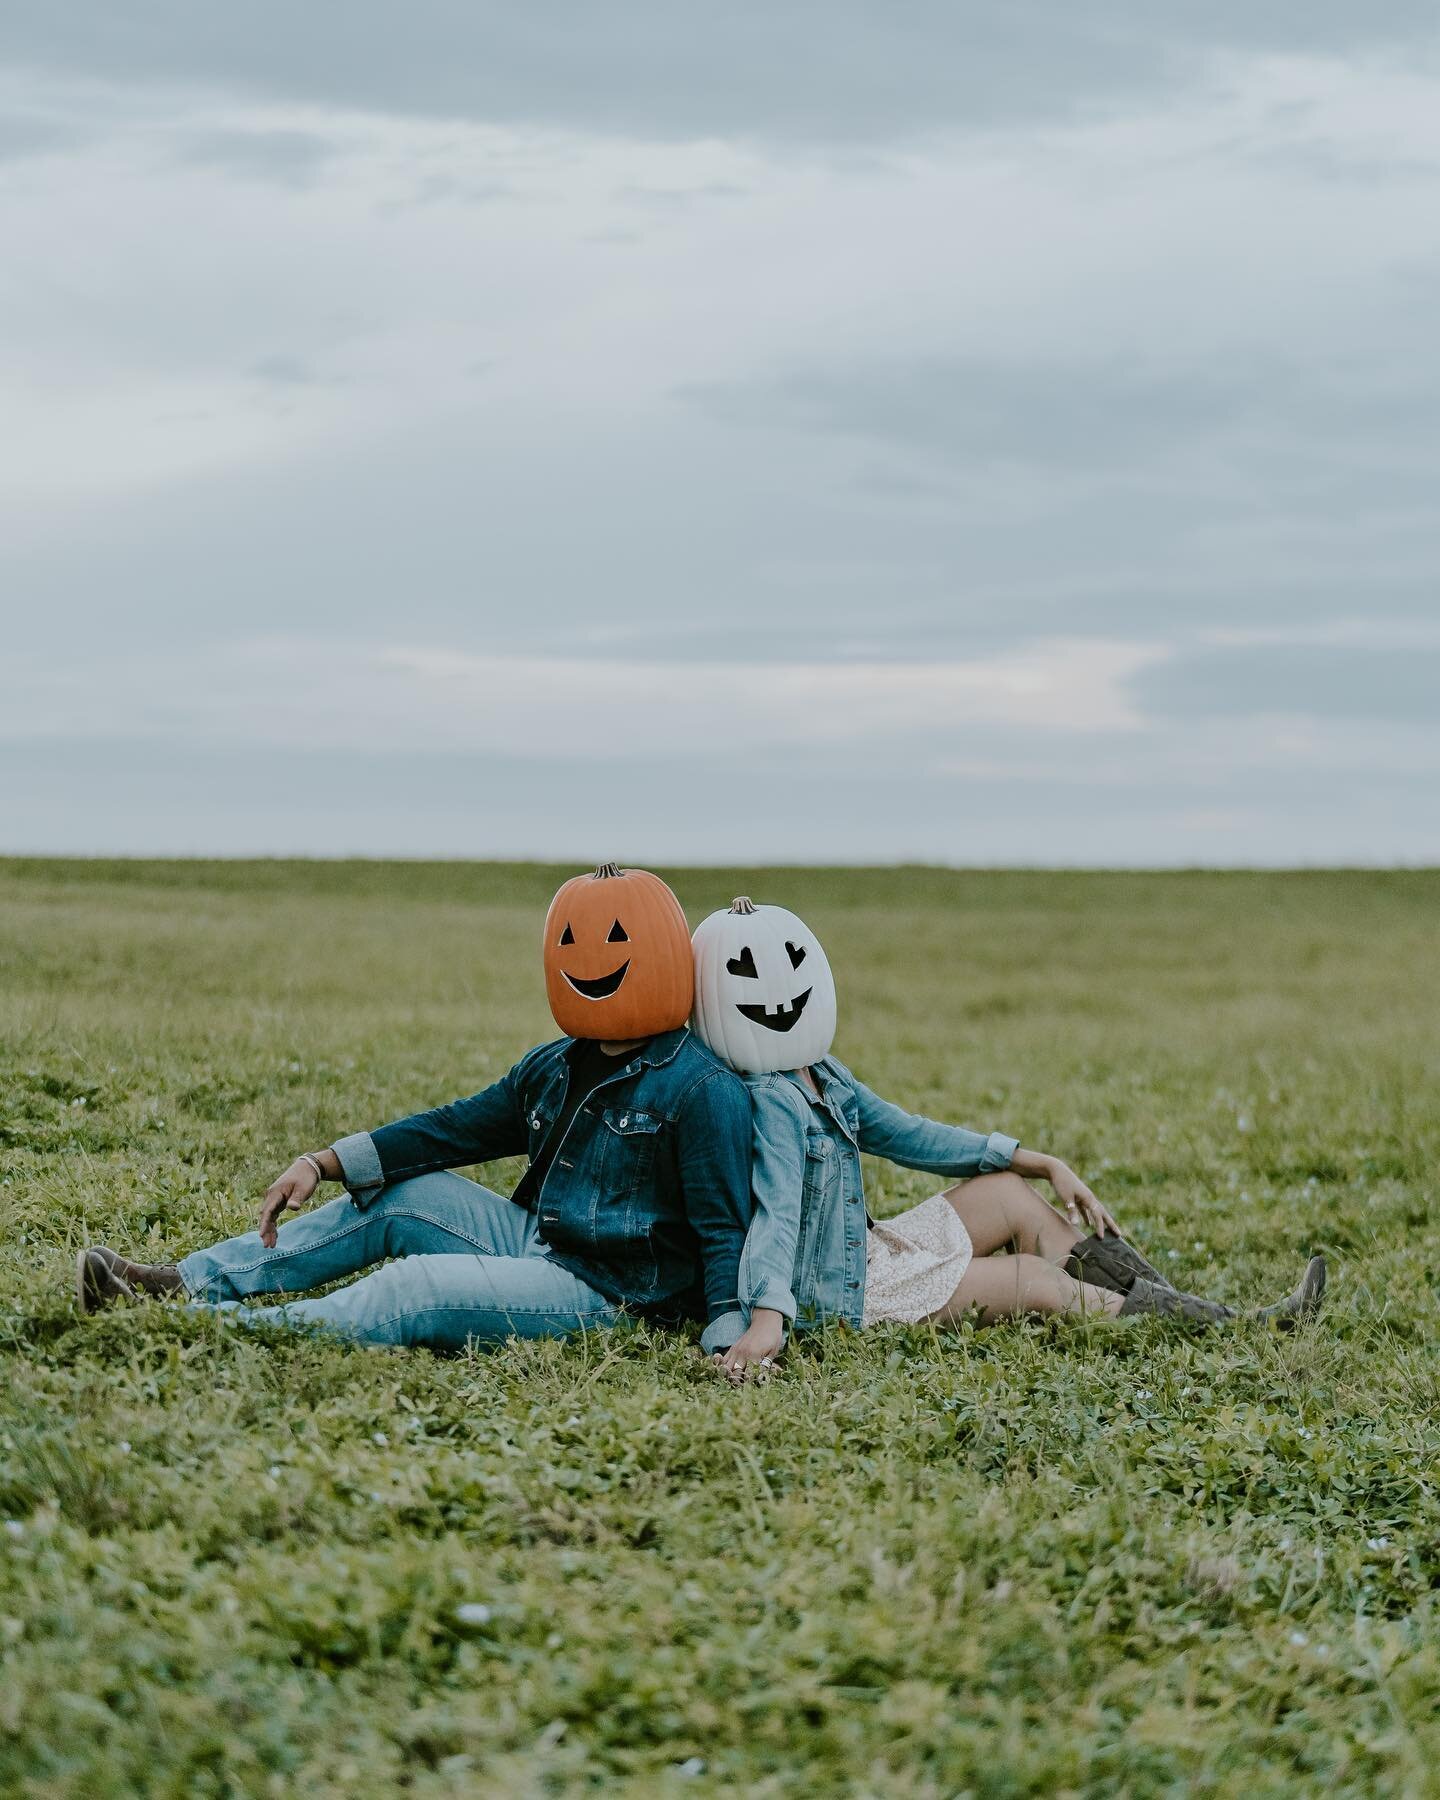 It&rsquo;s SPOOKY season 🎃👻
&bull;
&bull;
&bull;
&bull;
#spookyseason
#halloweenphotoshoot 
#spookyphotoshoot 
#couplesphotography 
#couplesession 
#pumpkinheadphotoshoot 
#creativesession 
#poseideas 
#couplesportraits 
#couplesposes 
#southflorid